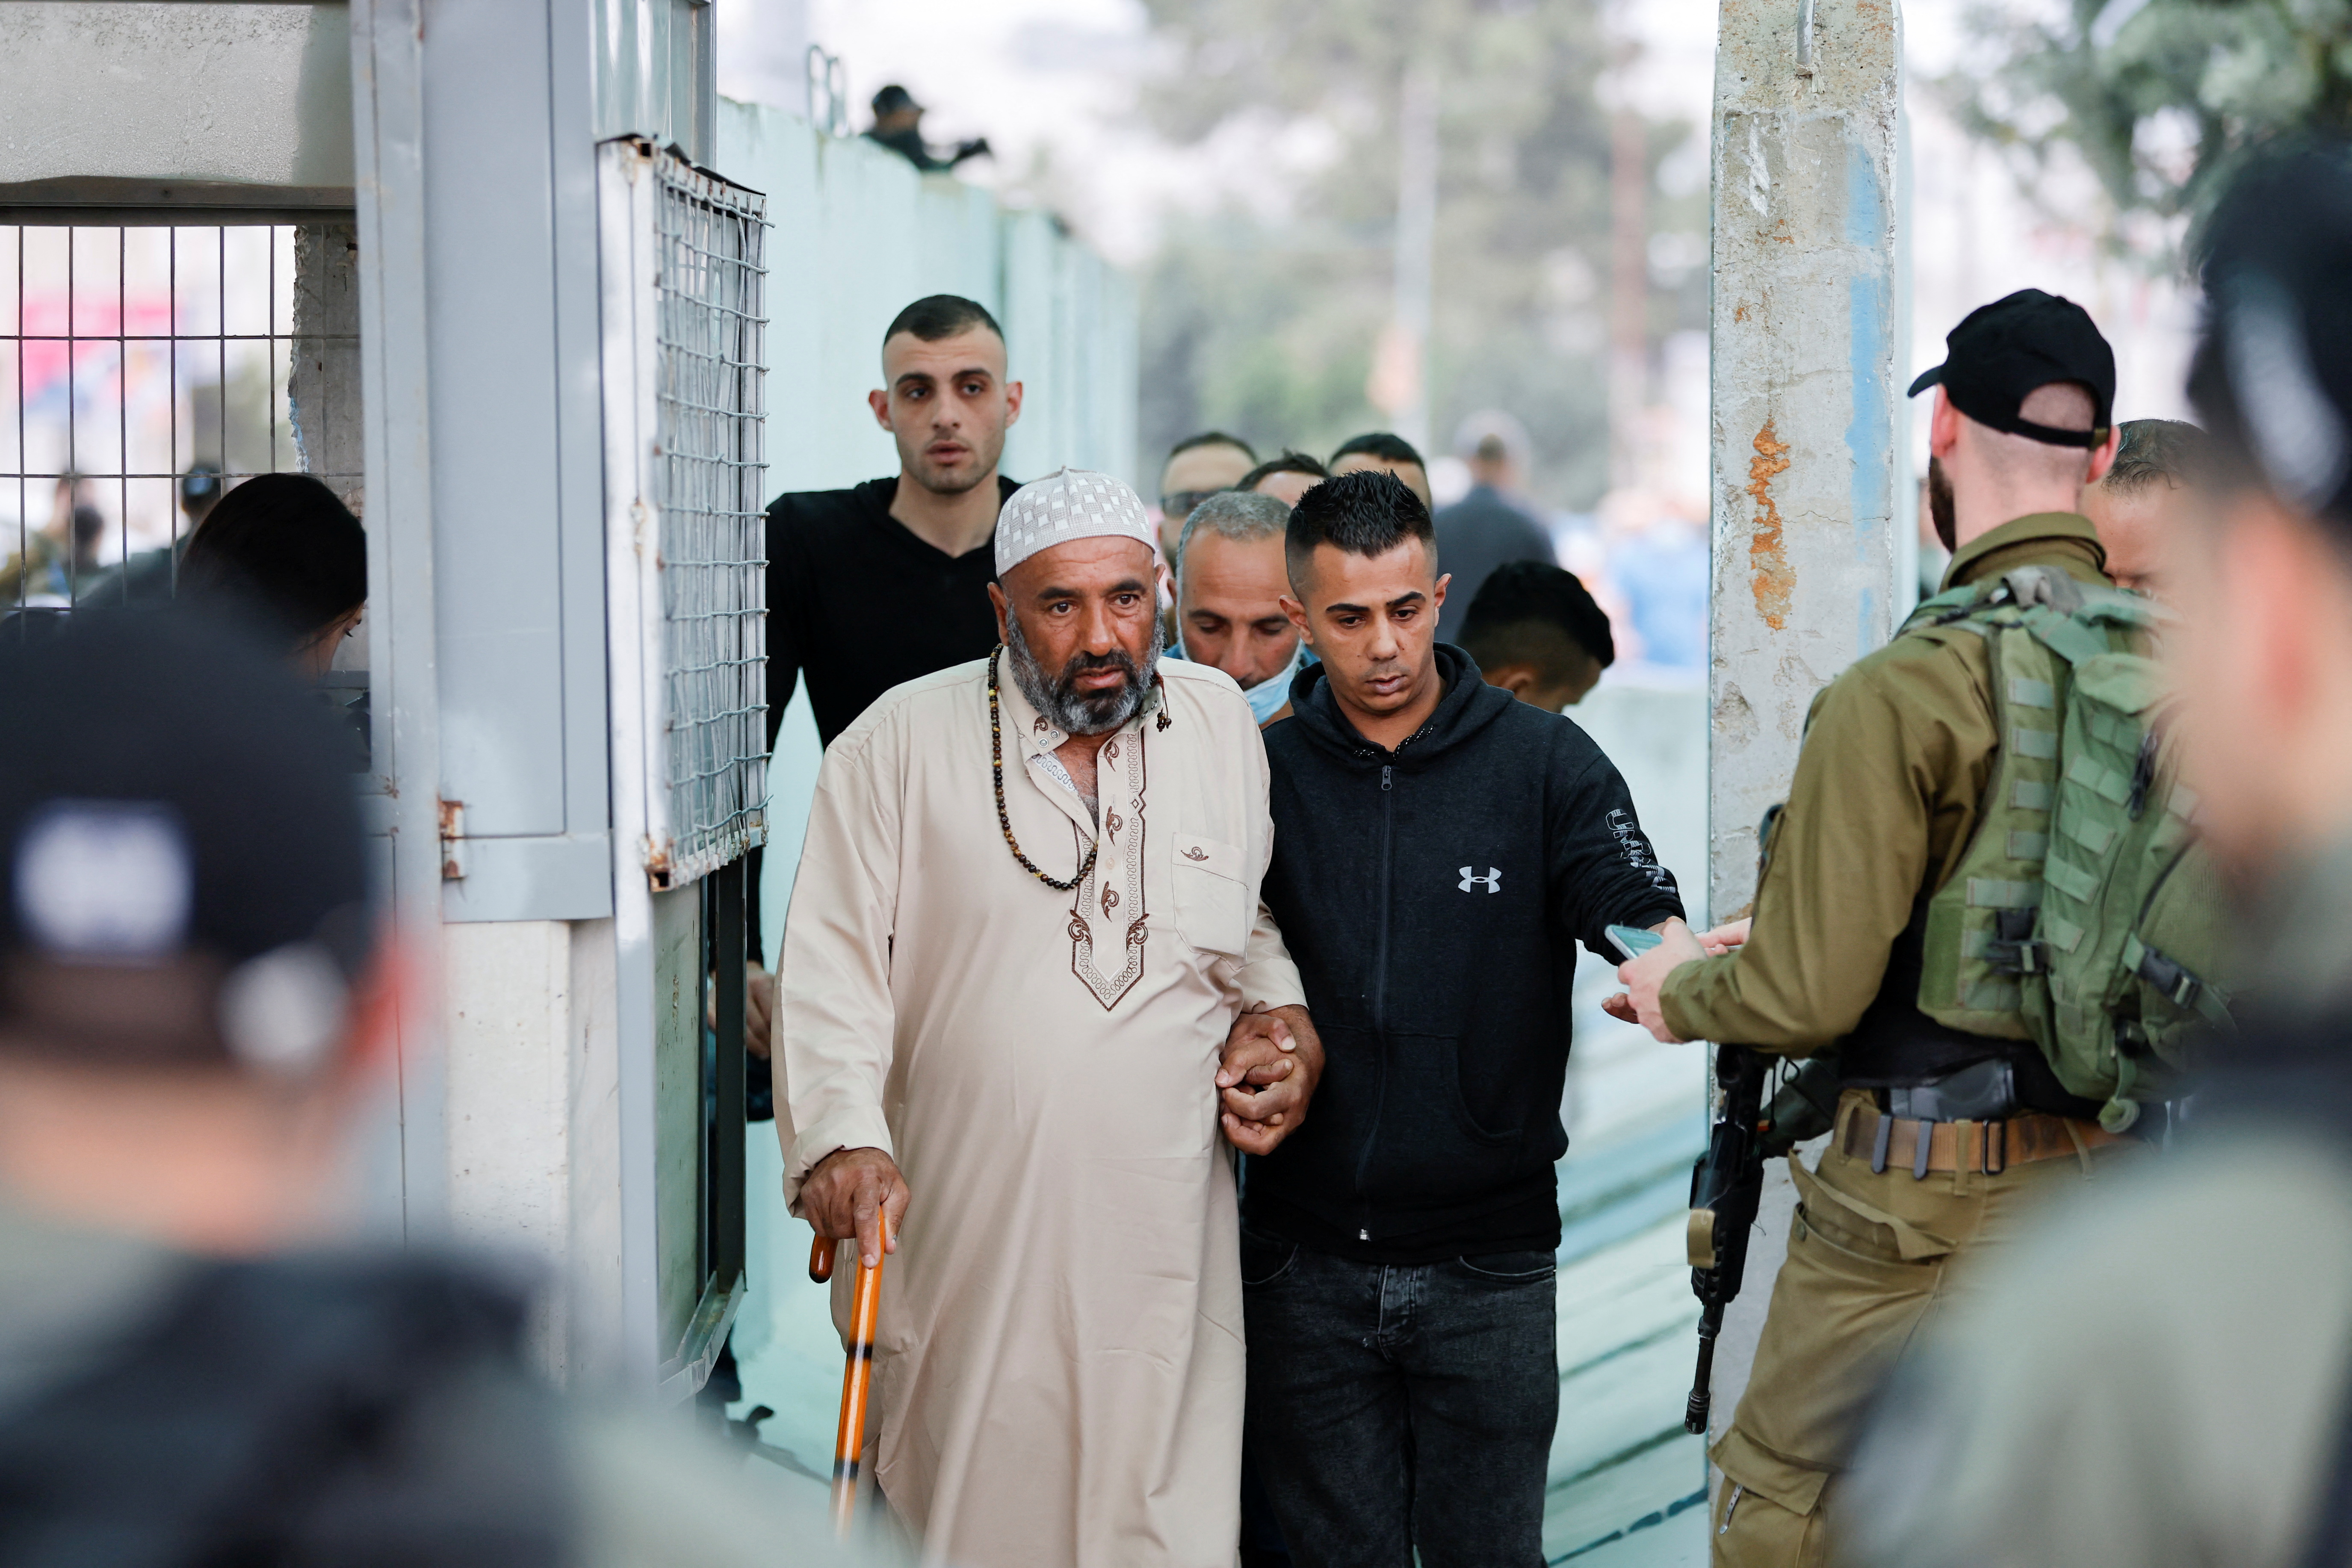 Palestinians make their way through an Israeli checkpoint to attend the first Friday prayers of Ramadan in Jerusalem's Al-Aqsa mosque, in Bethlehem in the Israeli-occupied West Bank